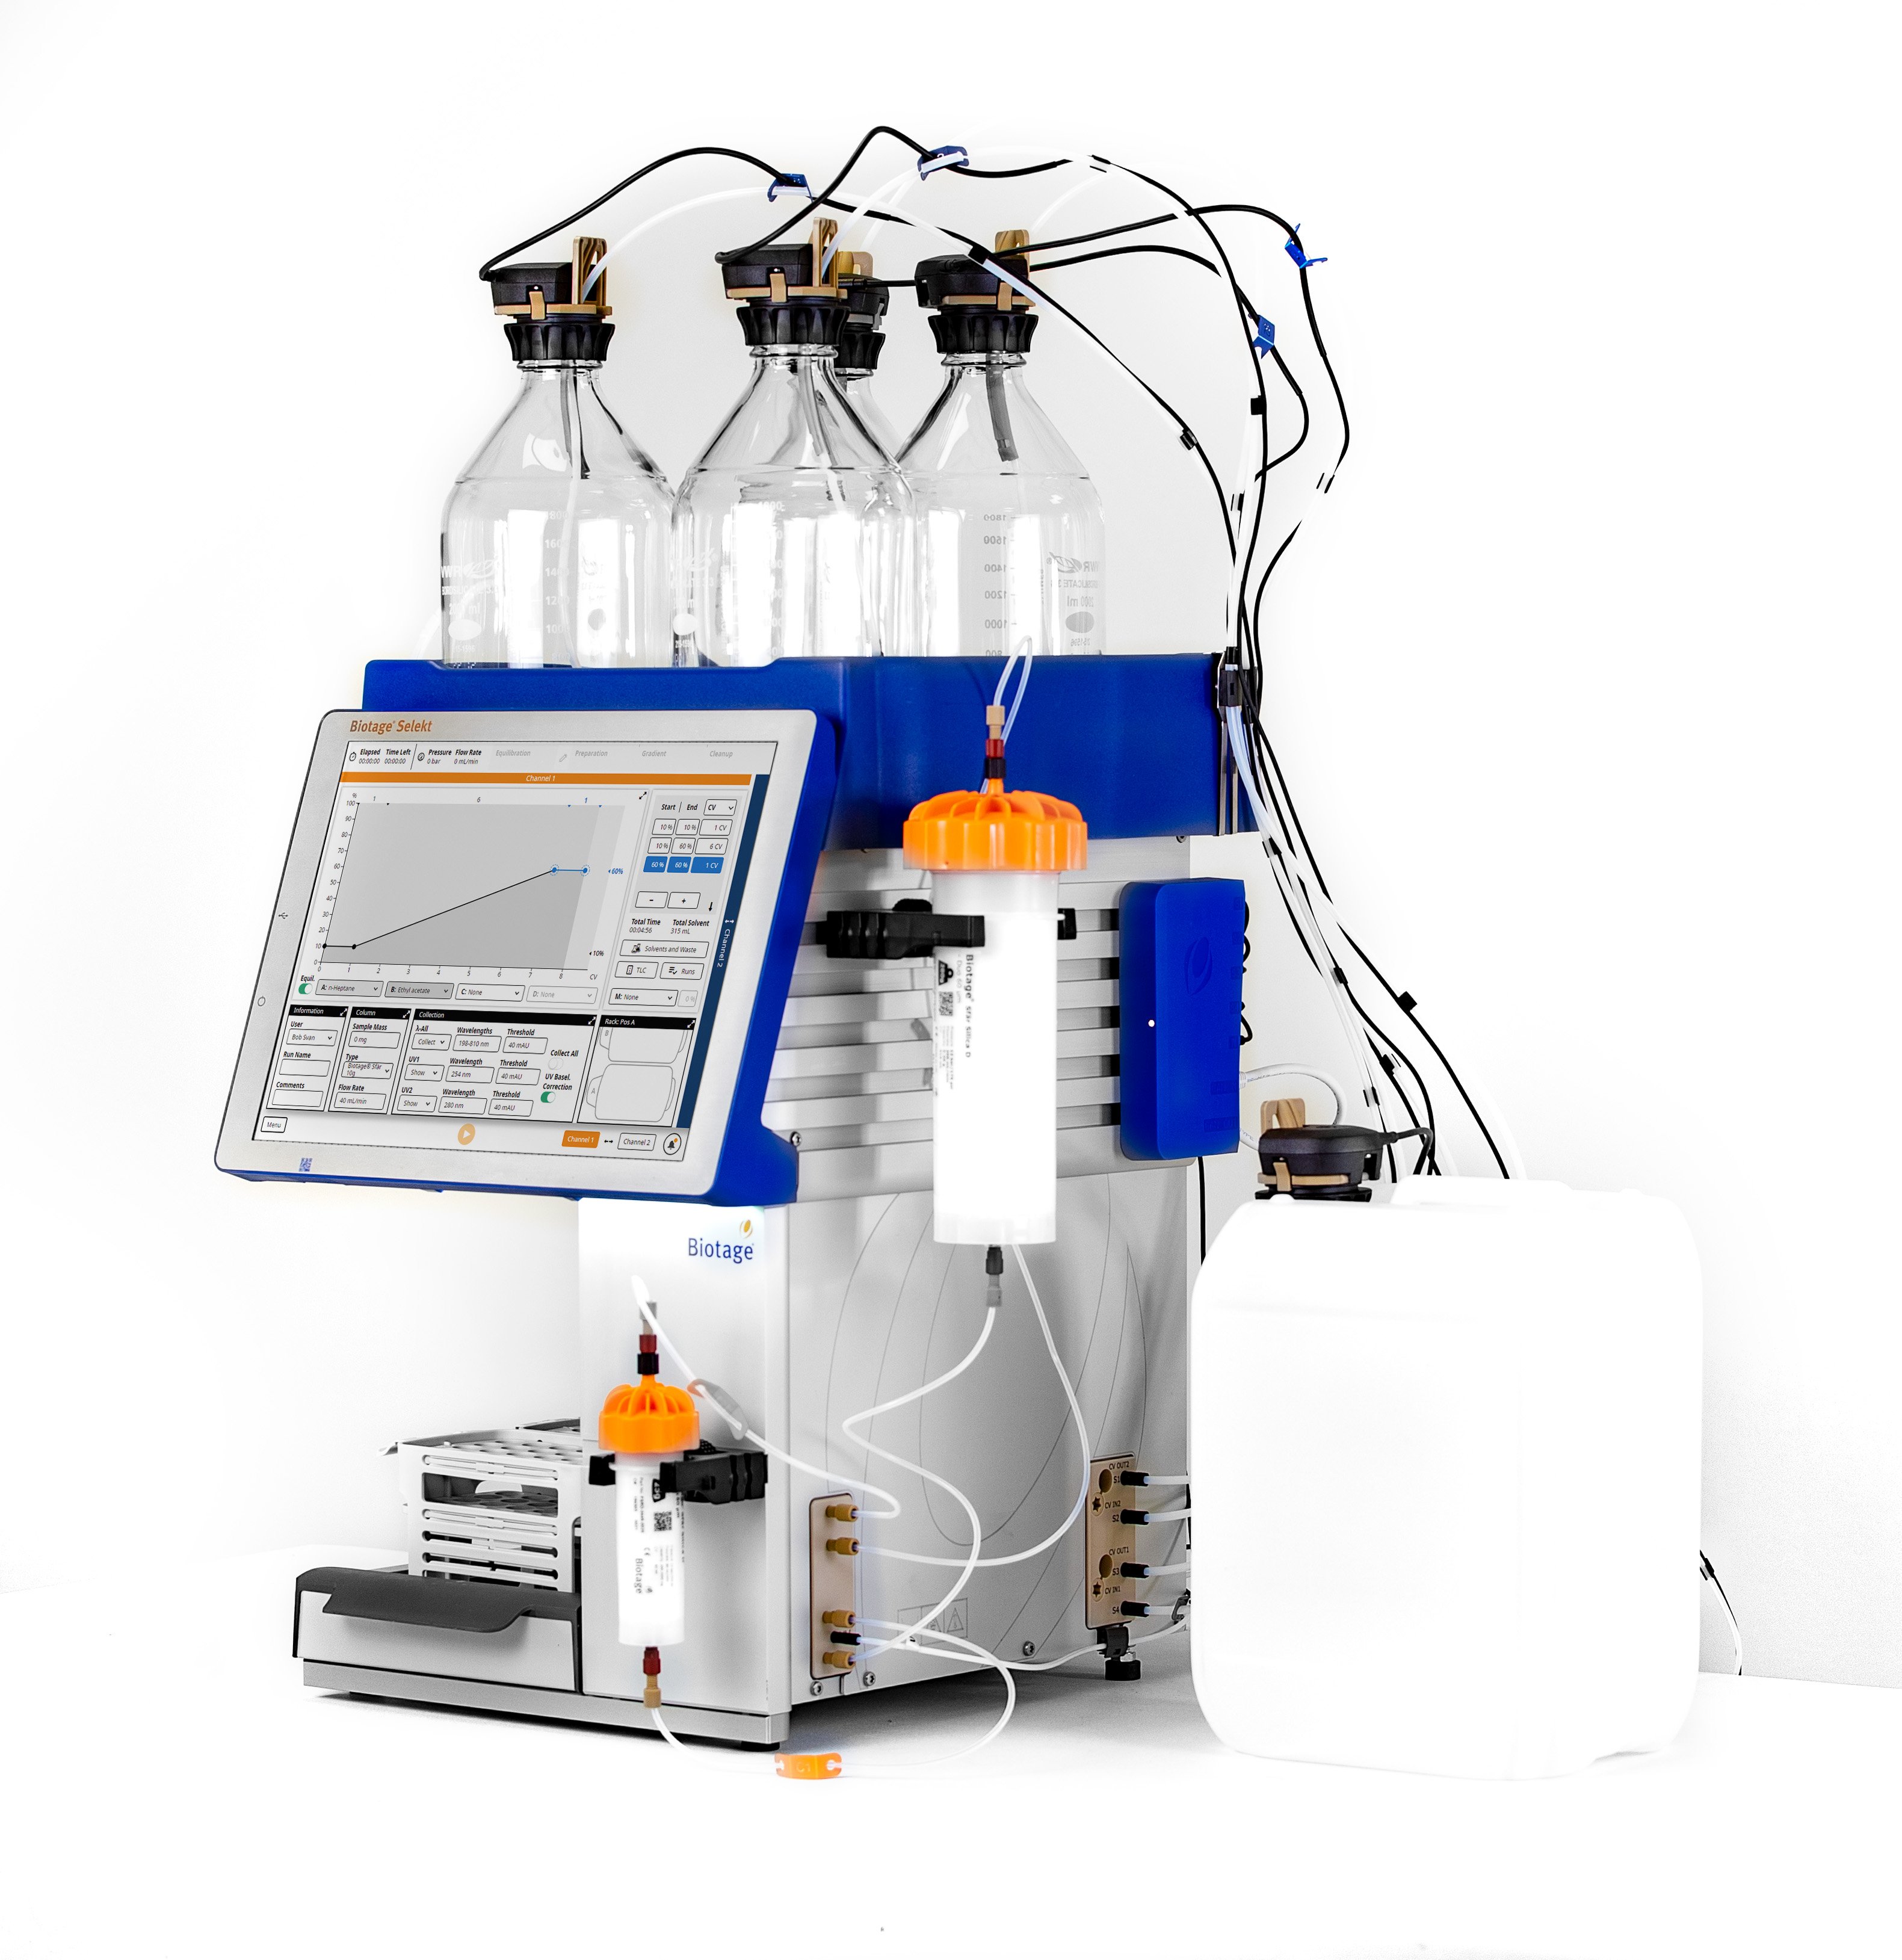 Real-time solvent and waste monitoring for flash chromatography